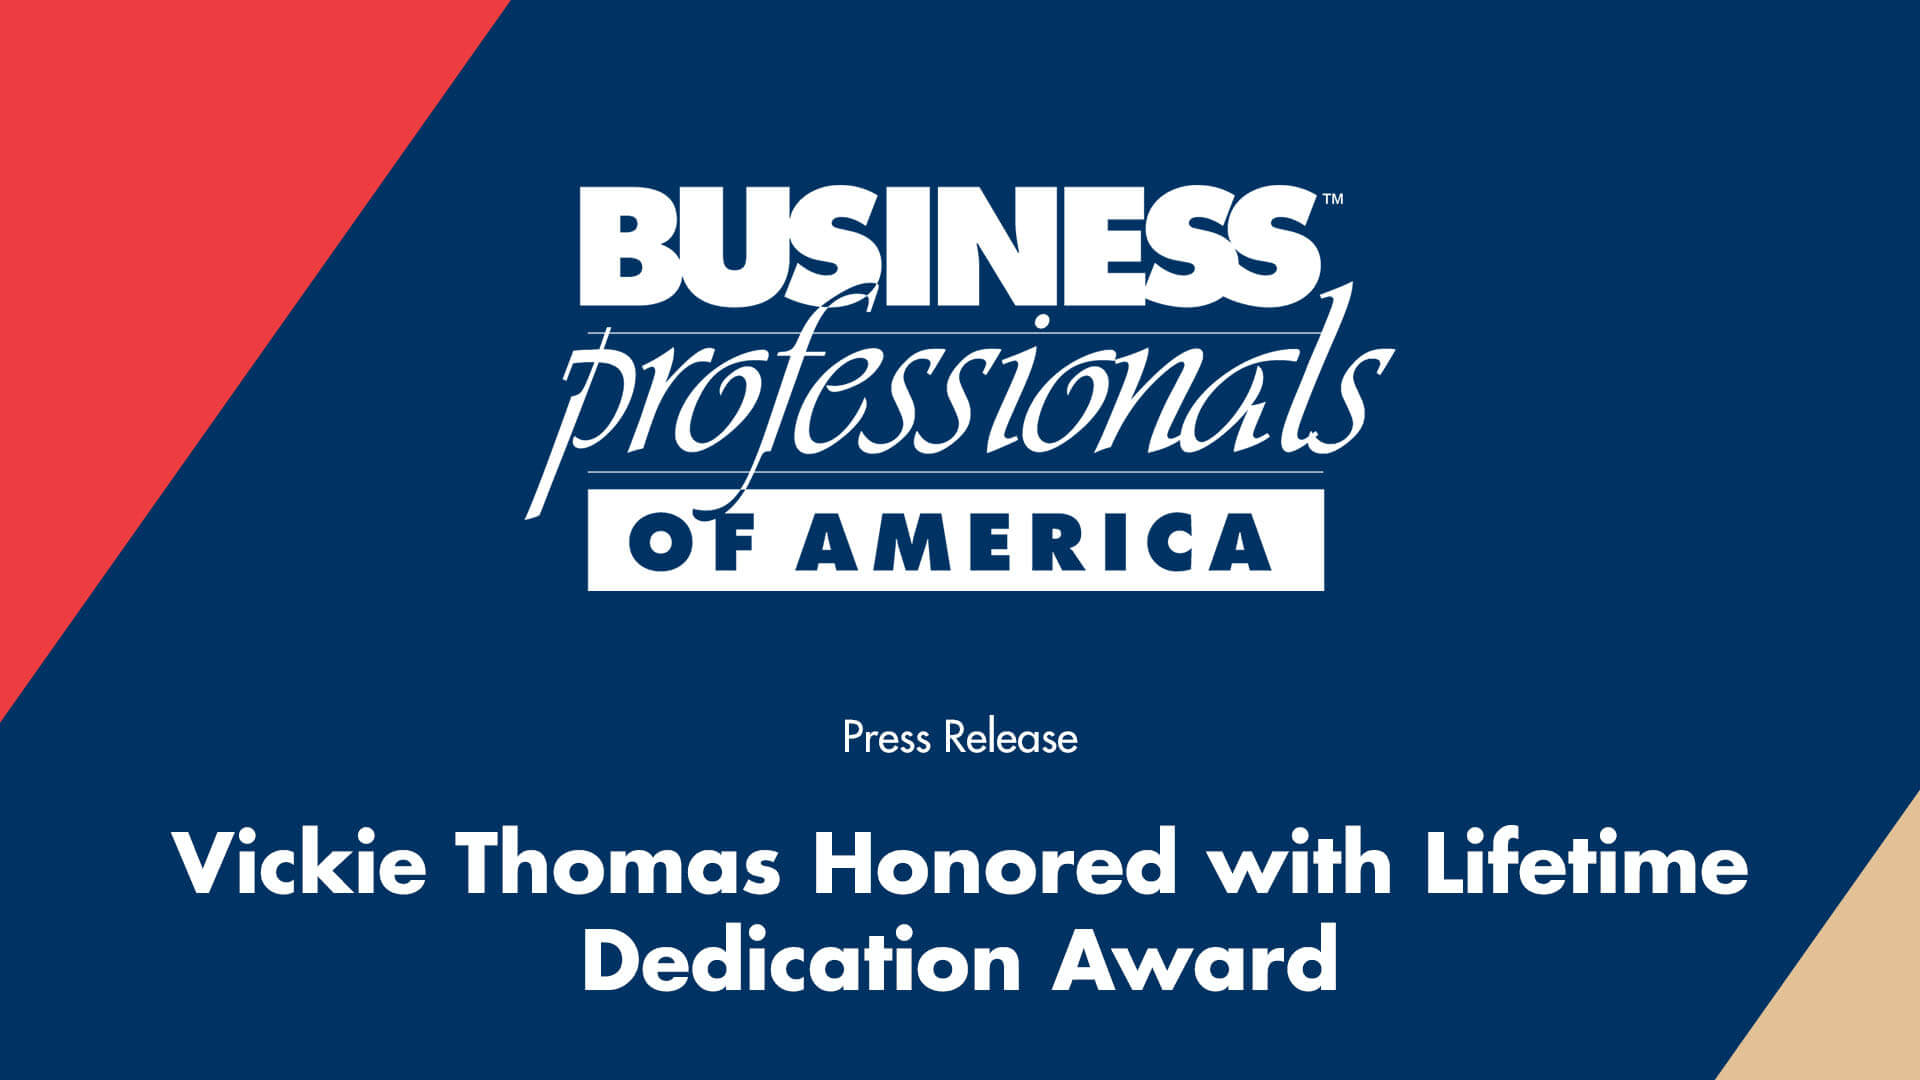 Vickie Thomas Honored with Lifetime Dedication Award from Business